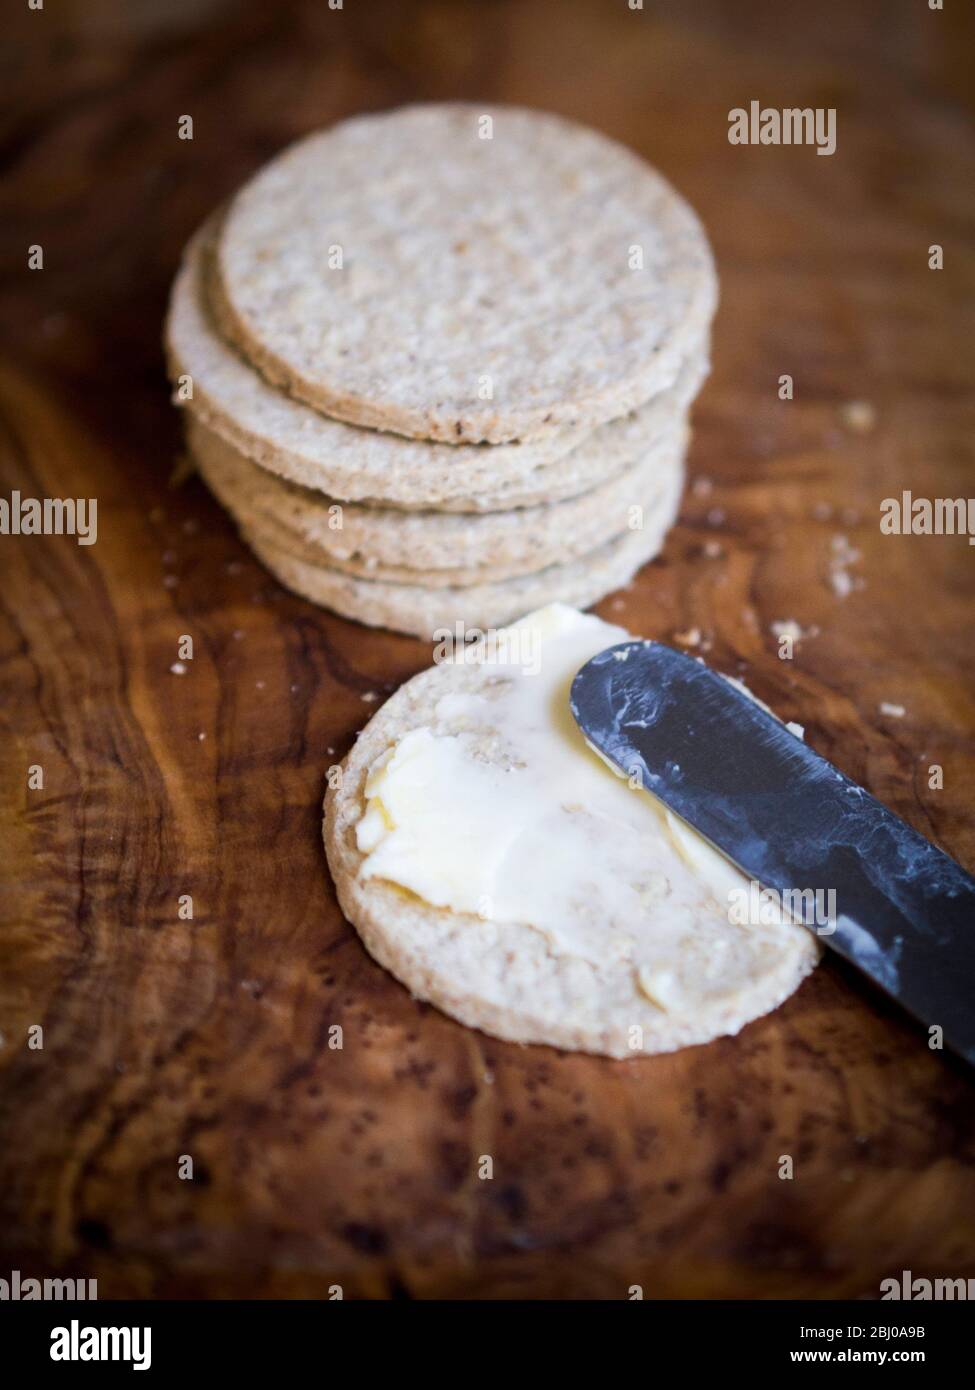 Gluten free Nairn's oatcakes spread with proper unsalted butter Stock Photo